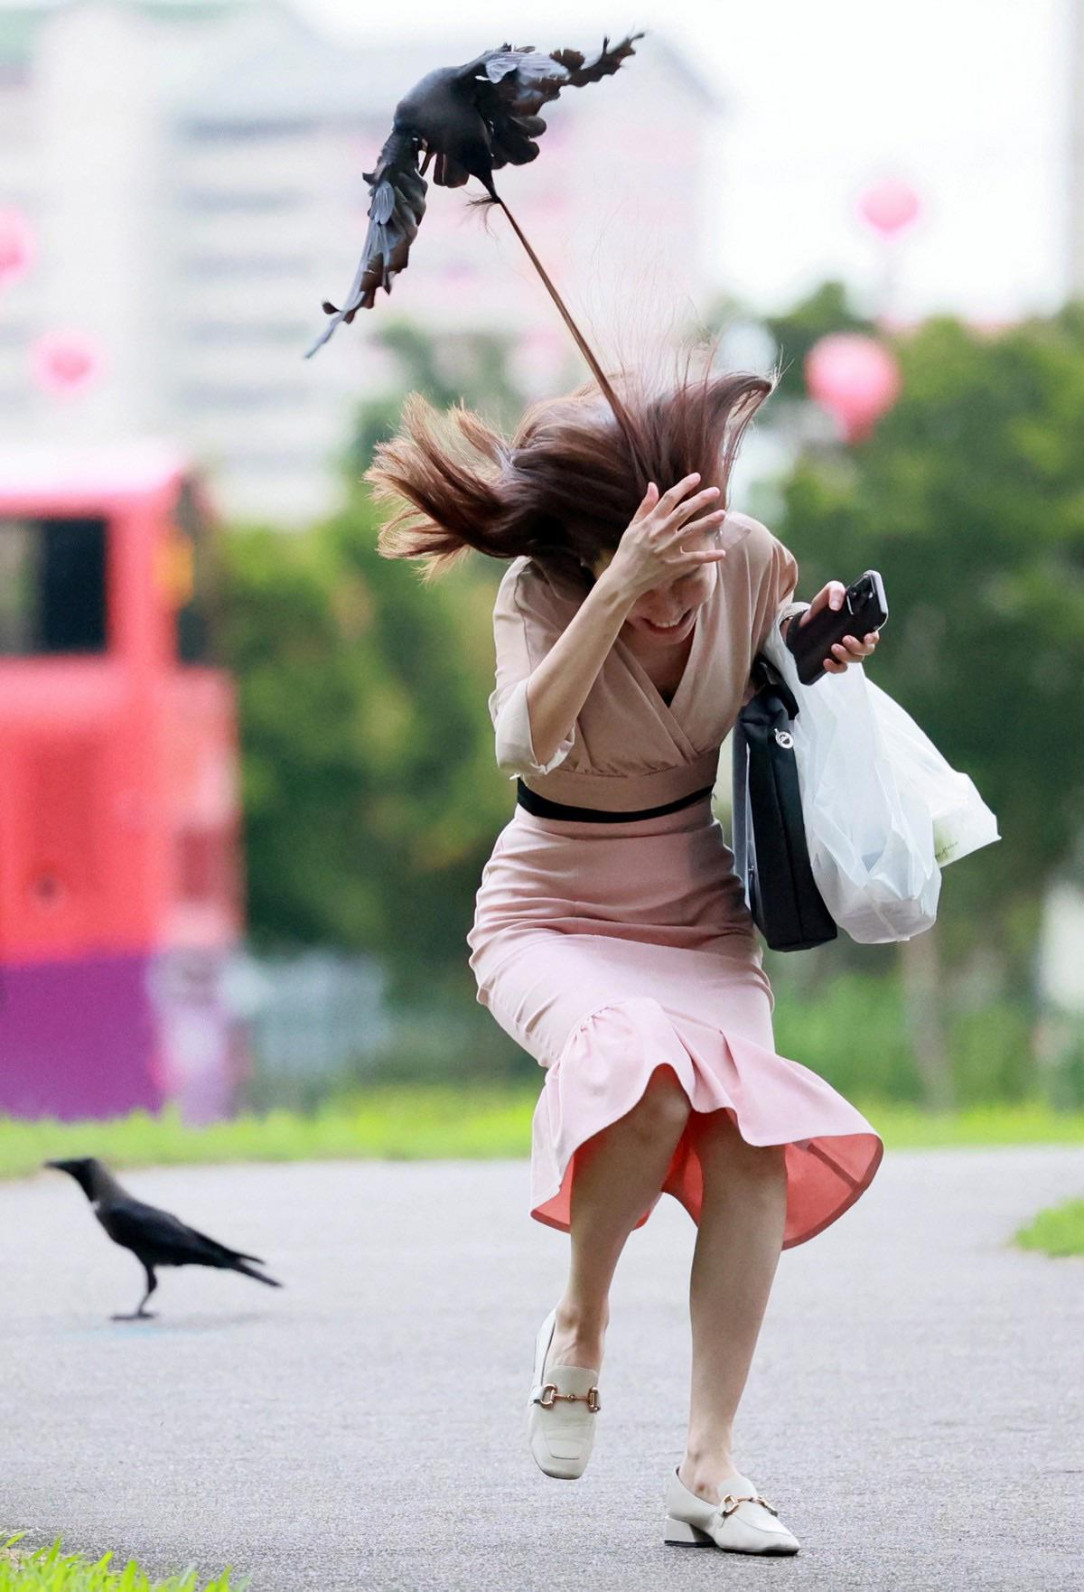 Ouch! Bird pulling woman’s hair…